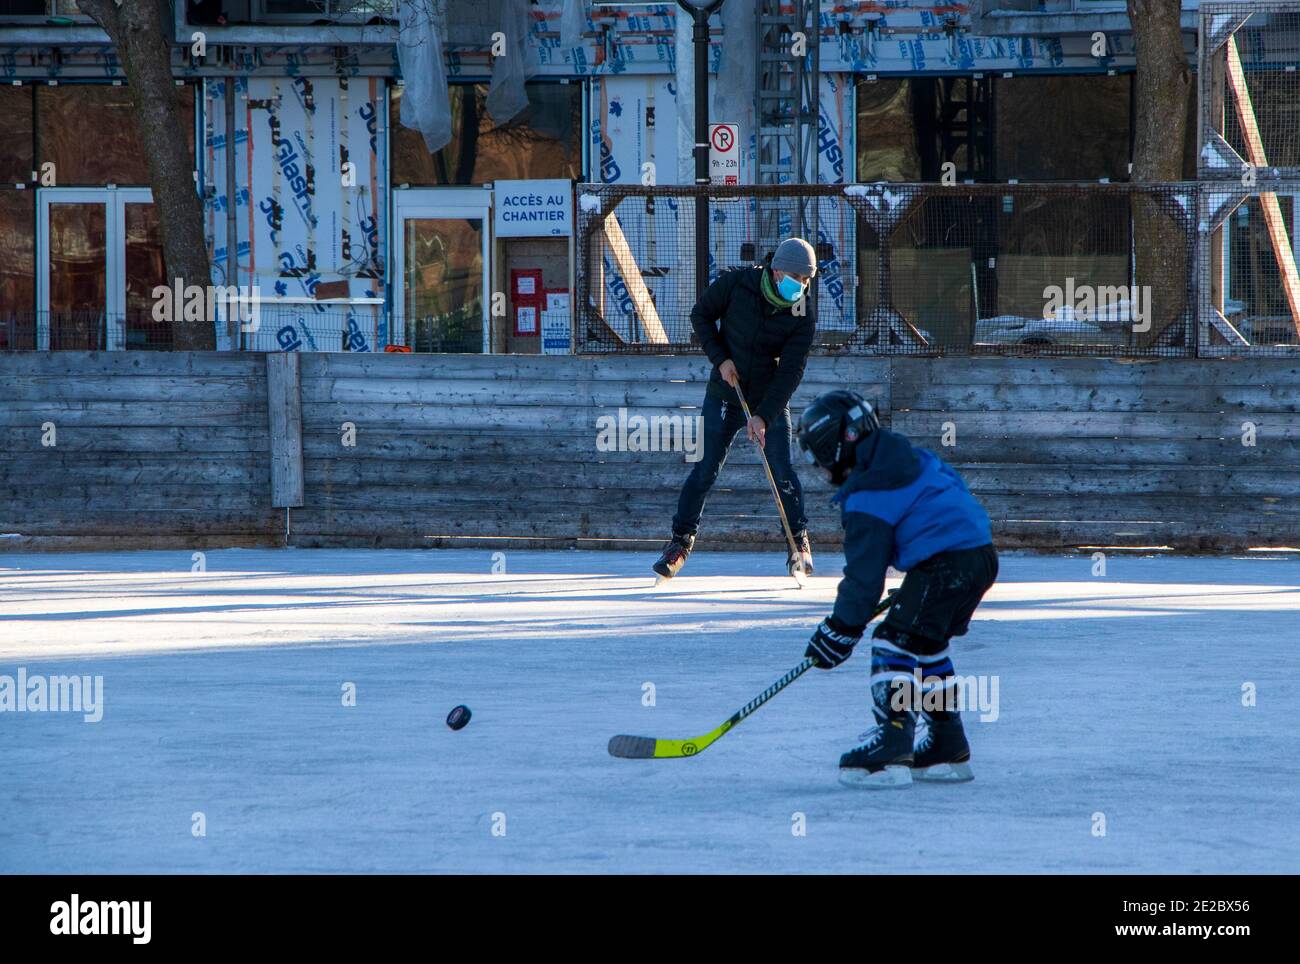 January 9, 2021 - Montréal, Qc, Canada: Man wearing a face mask while playing hockey with a child during COVID Coronavirus Pandemic, Rosemont borough Stock Photo